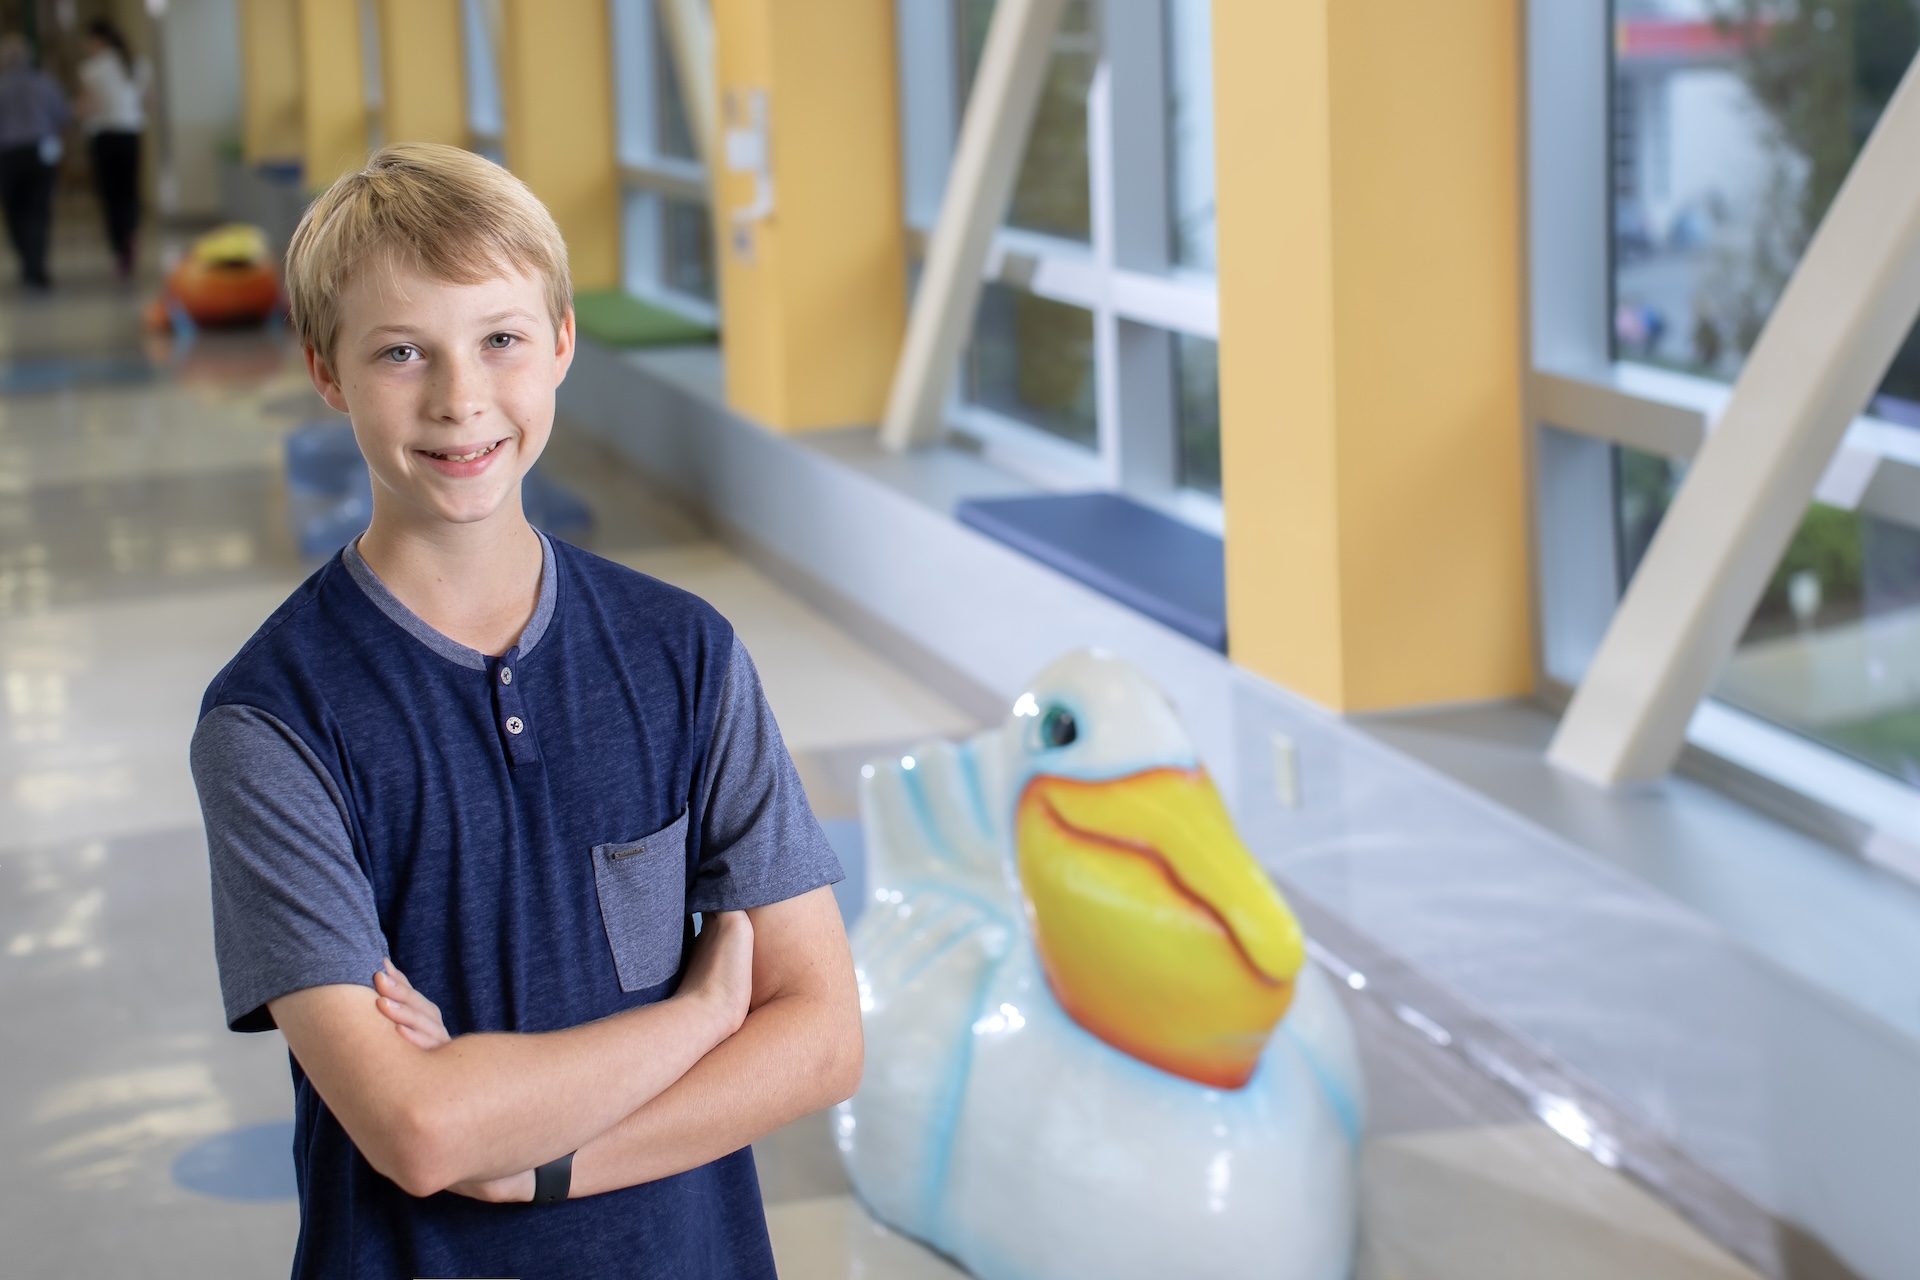 Gavin, who has been a patient at Johns Hopkins All Children’s Hospital since age 2.